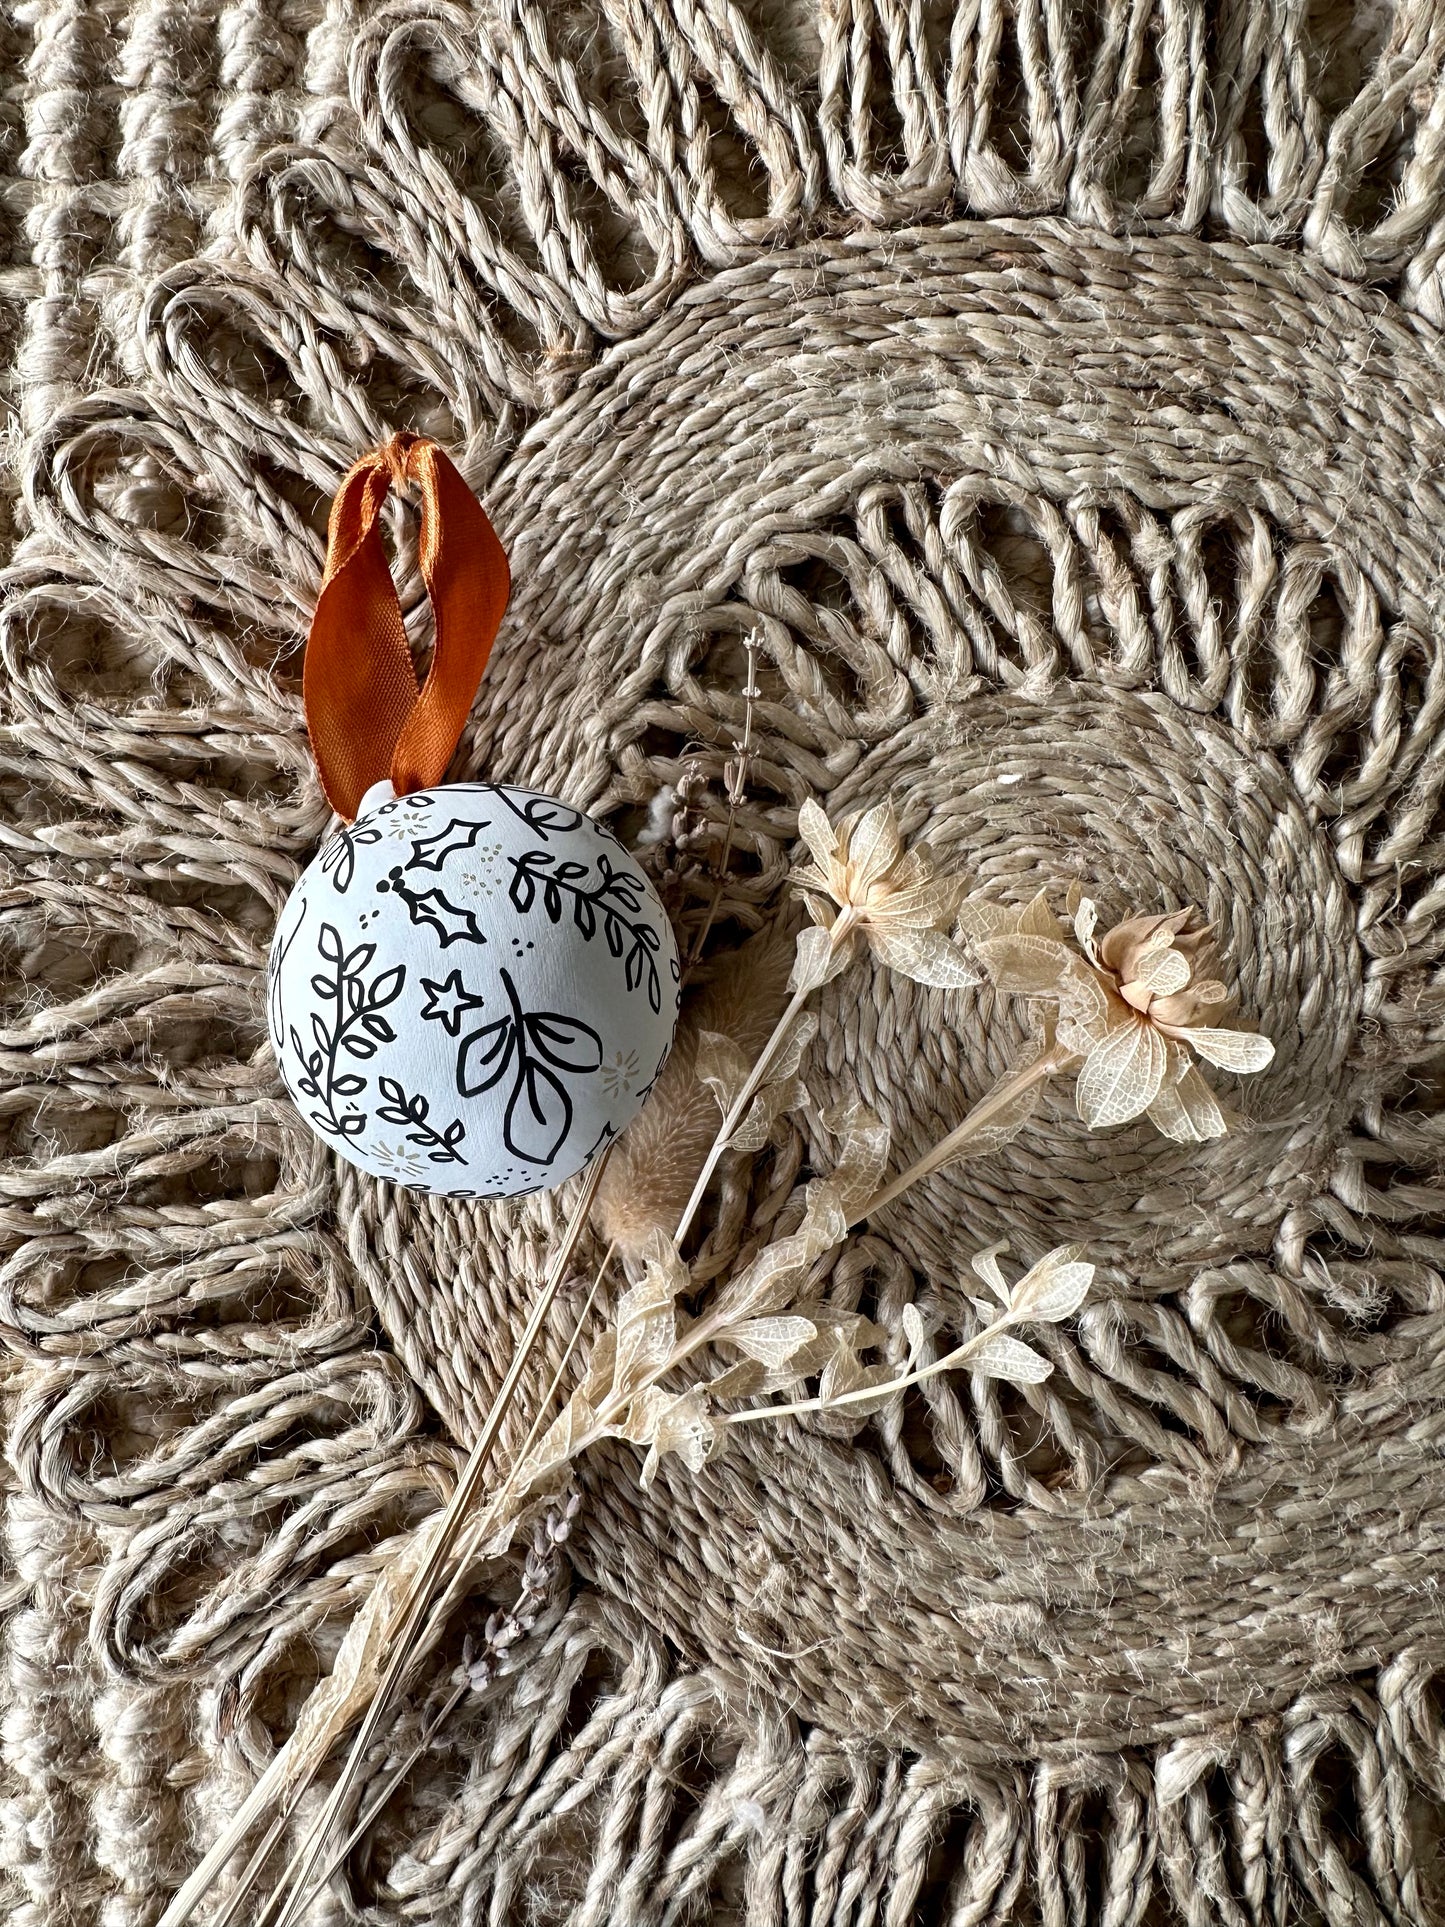 Personalised Hand Painted Ceramic Monochrome Christmas Bauble